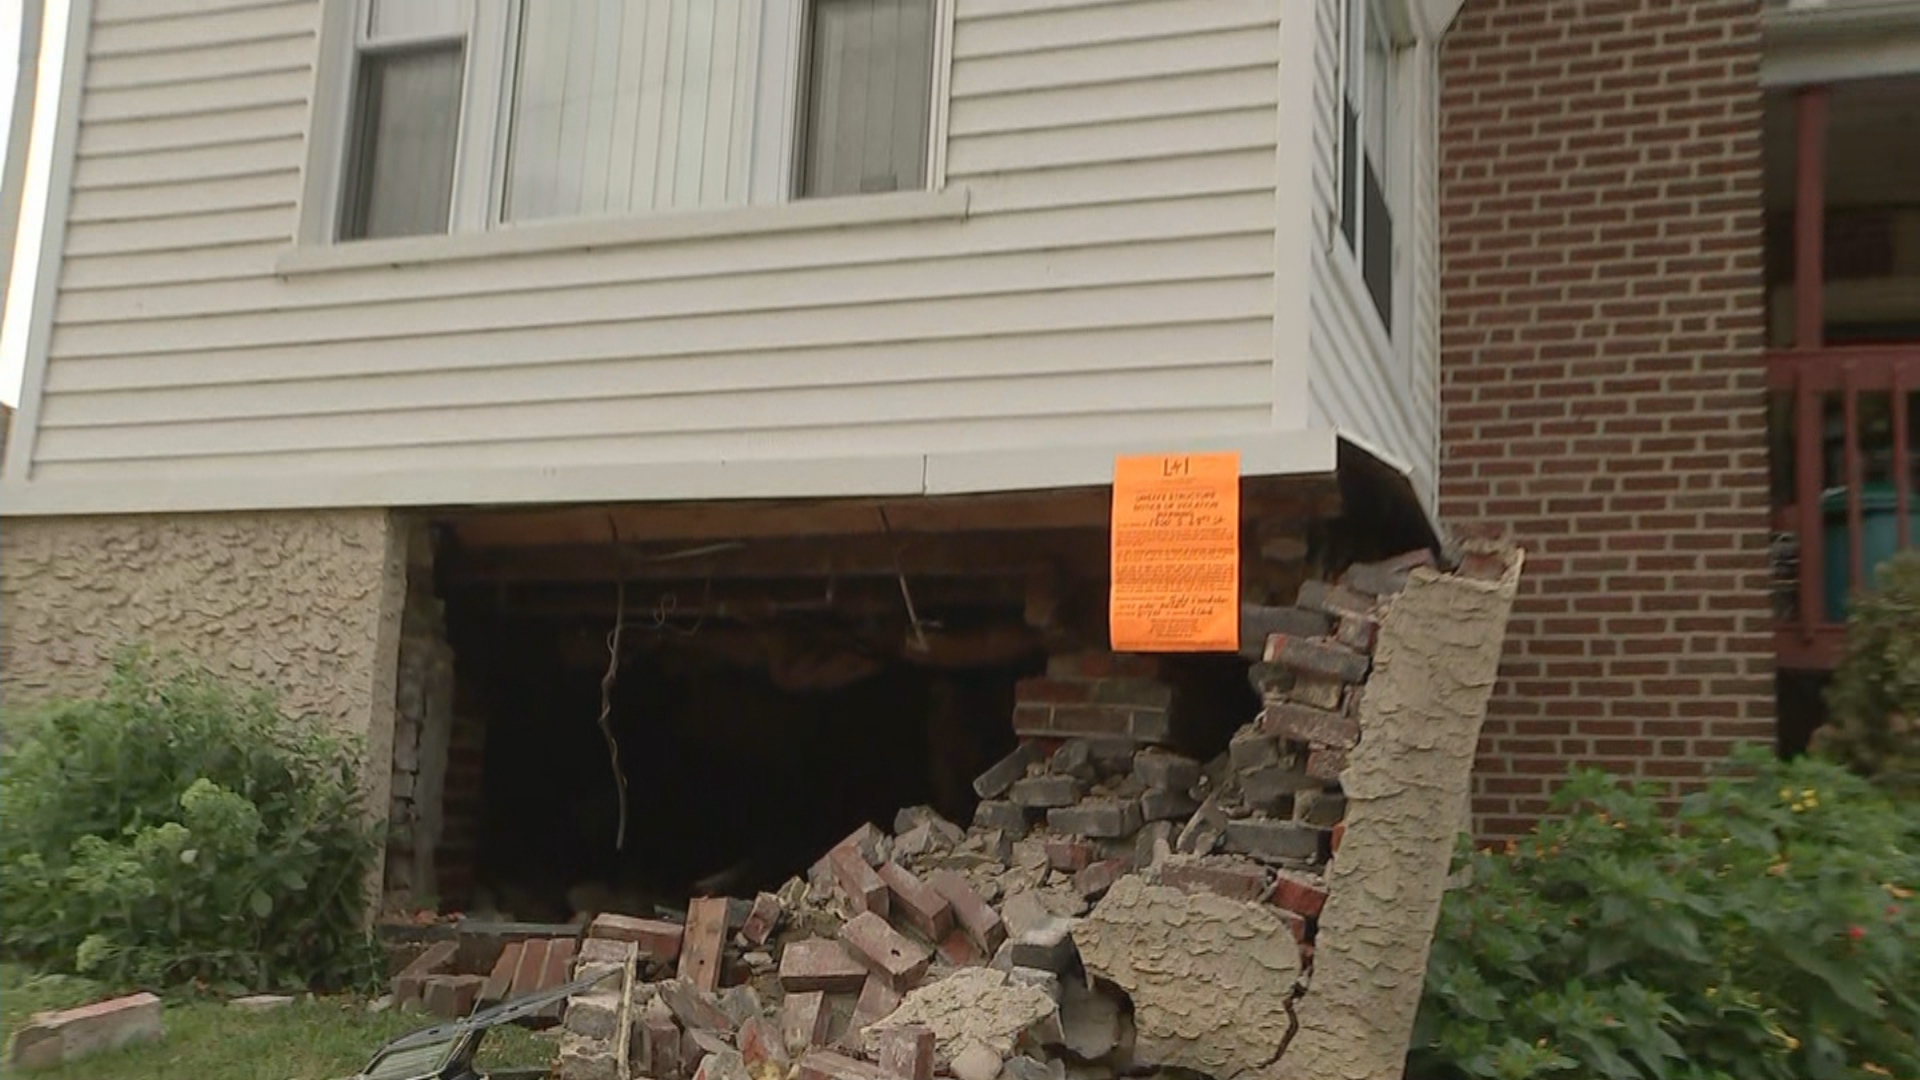 'This Is The Worst': Driver Crashes Vehicle Into Home Overnight In Southwest Philadelphia